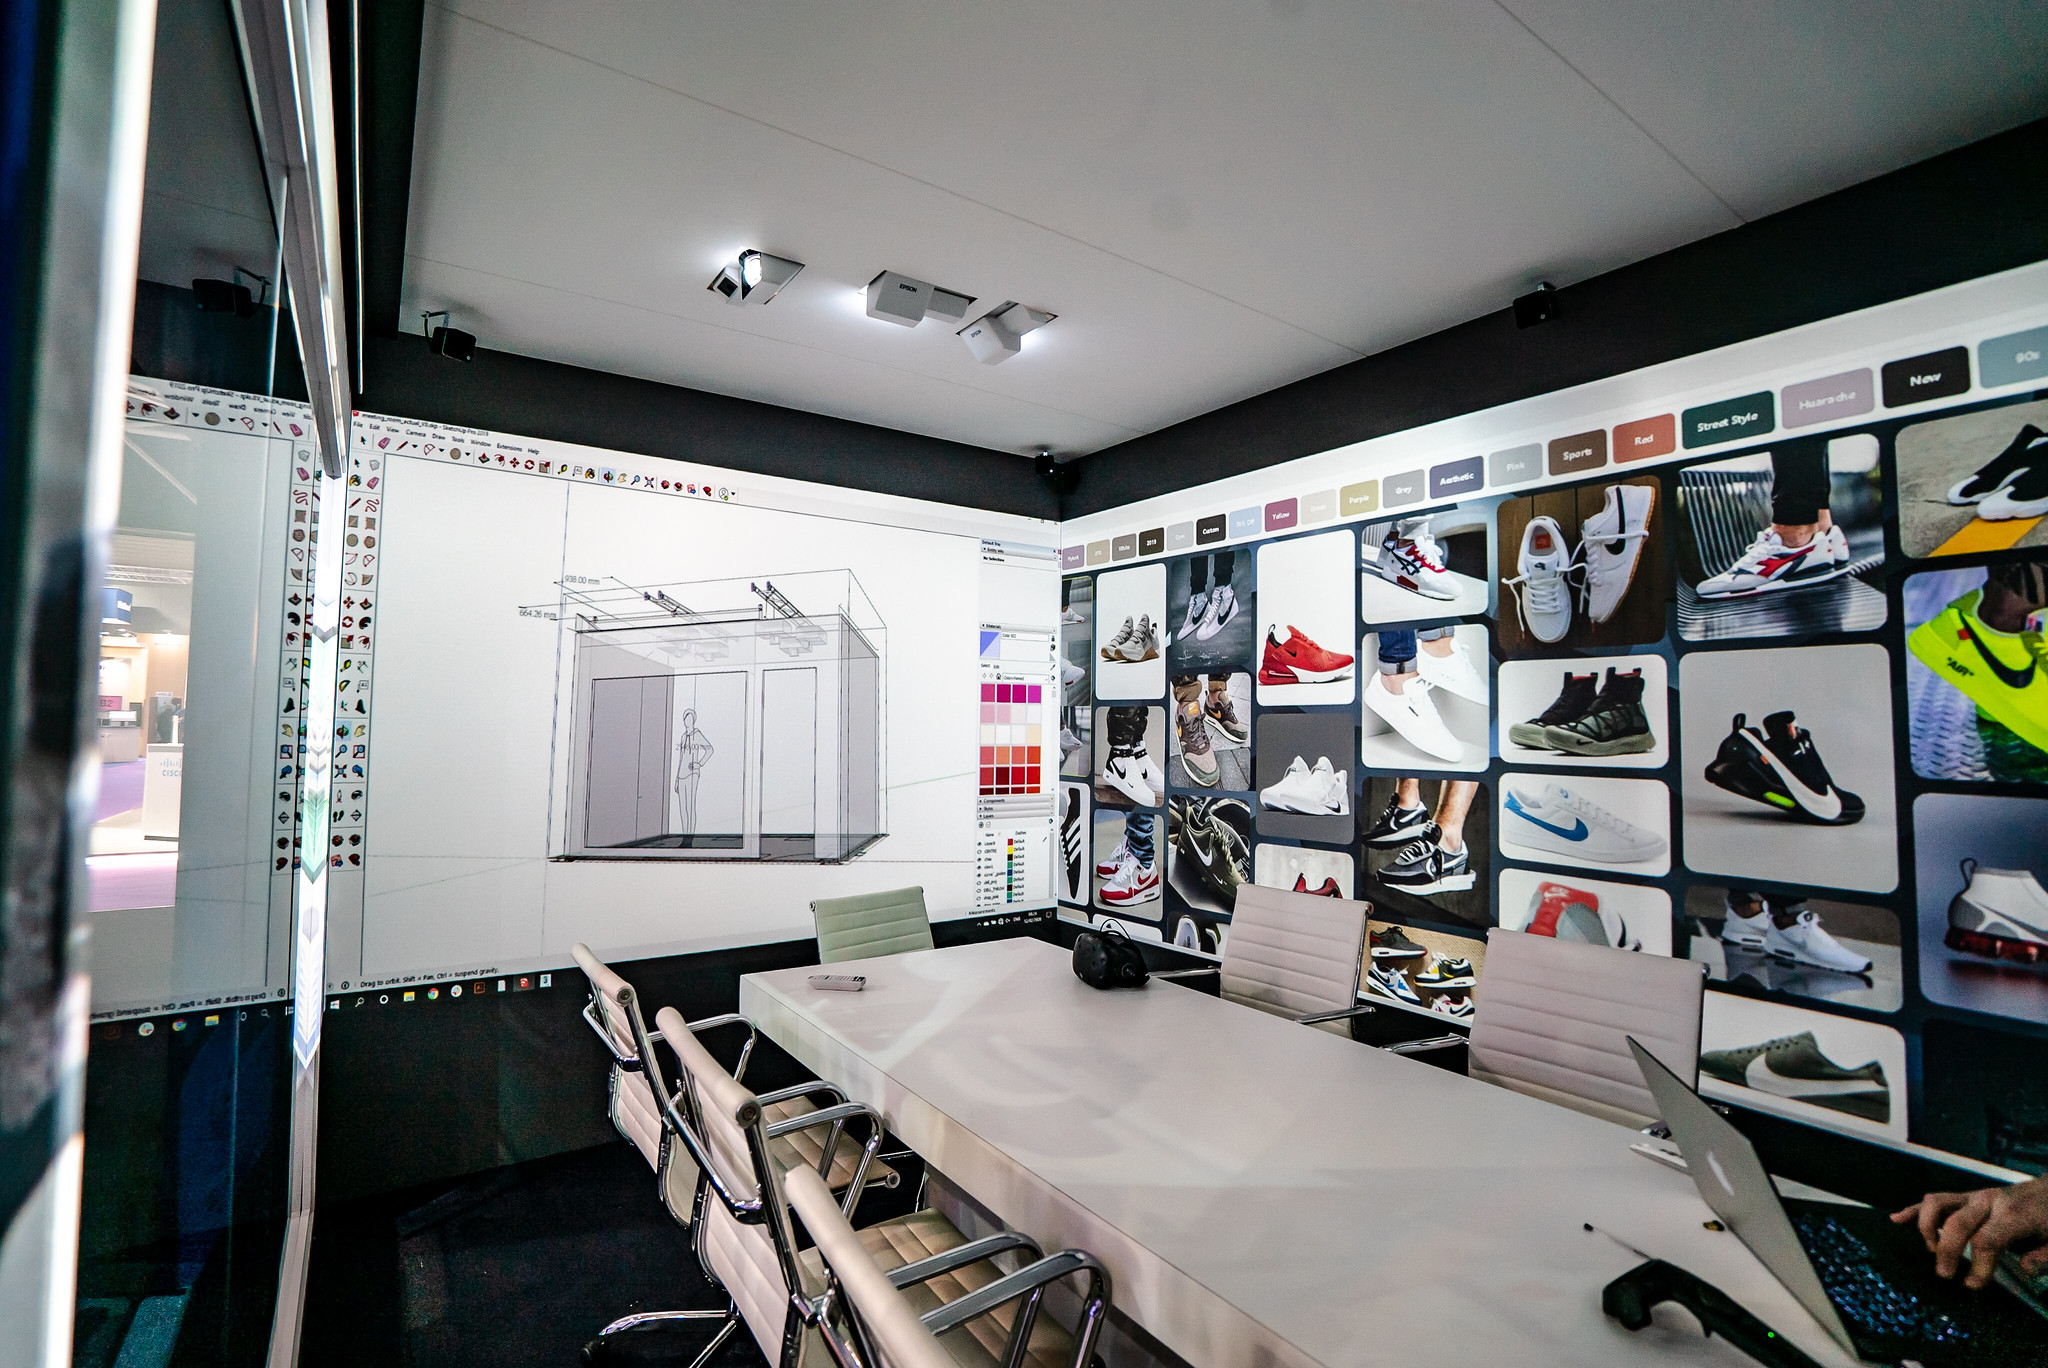 Igloo Vision wrap around technology being used in an office